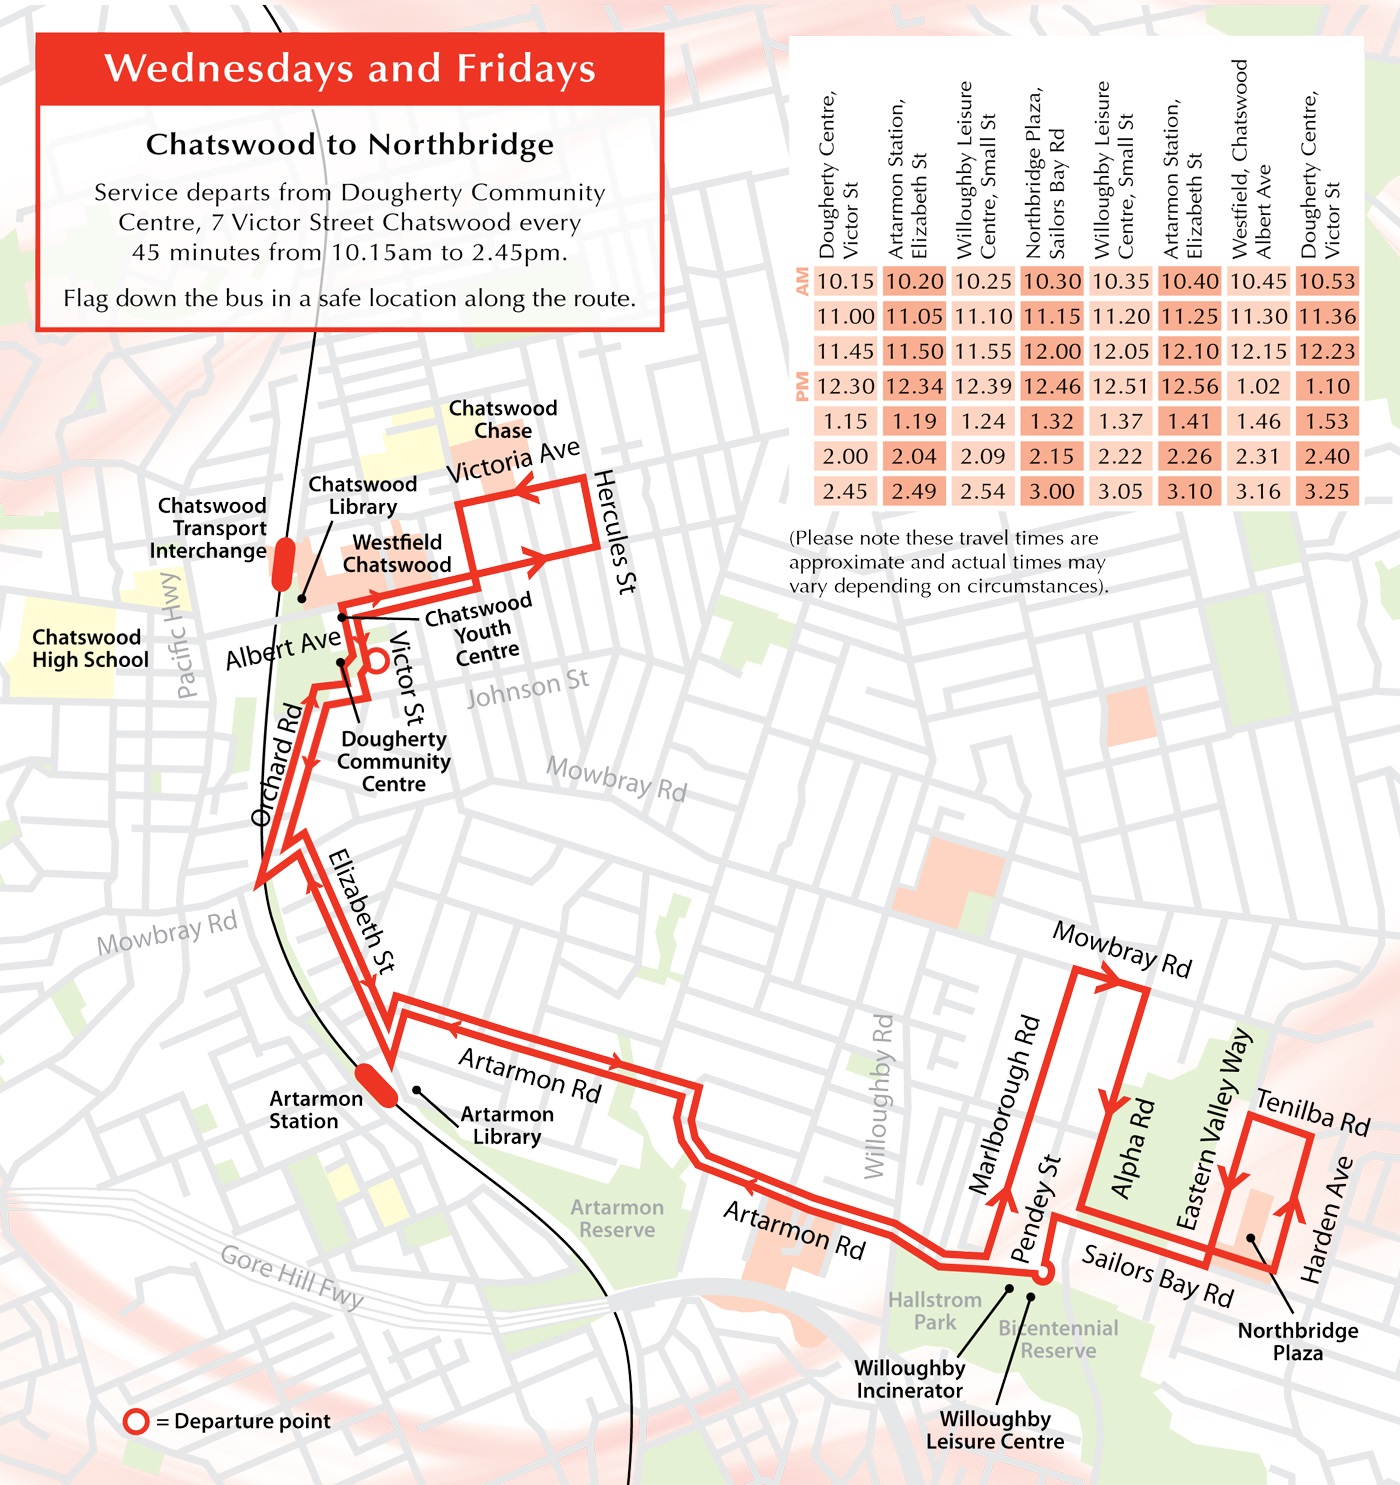 The-Loop-Map-and-Timetable-Wednesdays-and-Fridays.jpg